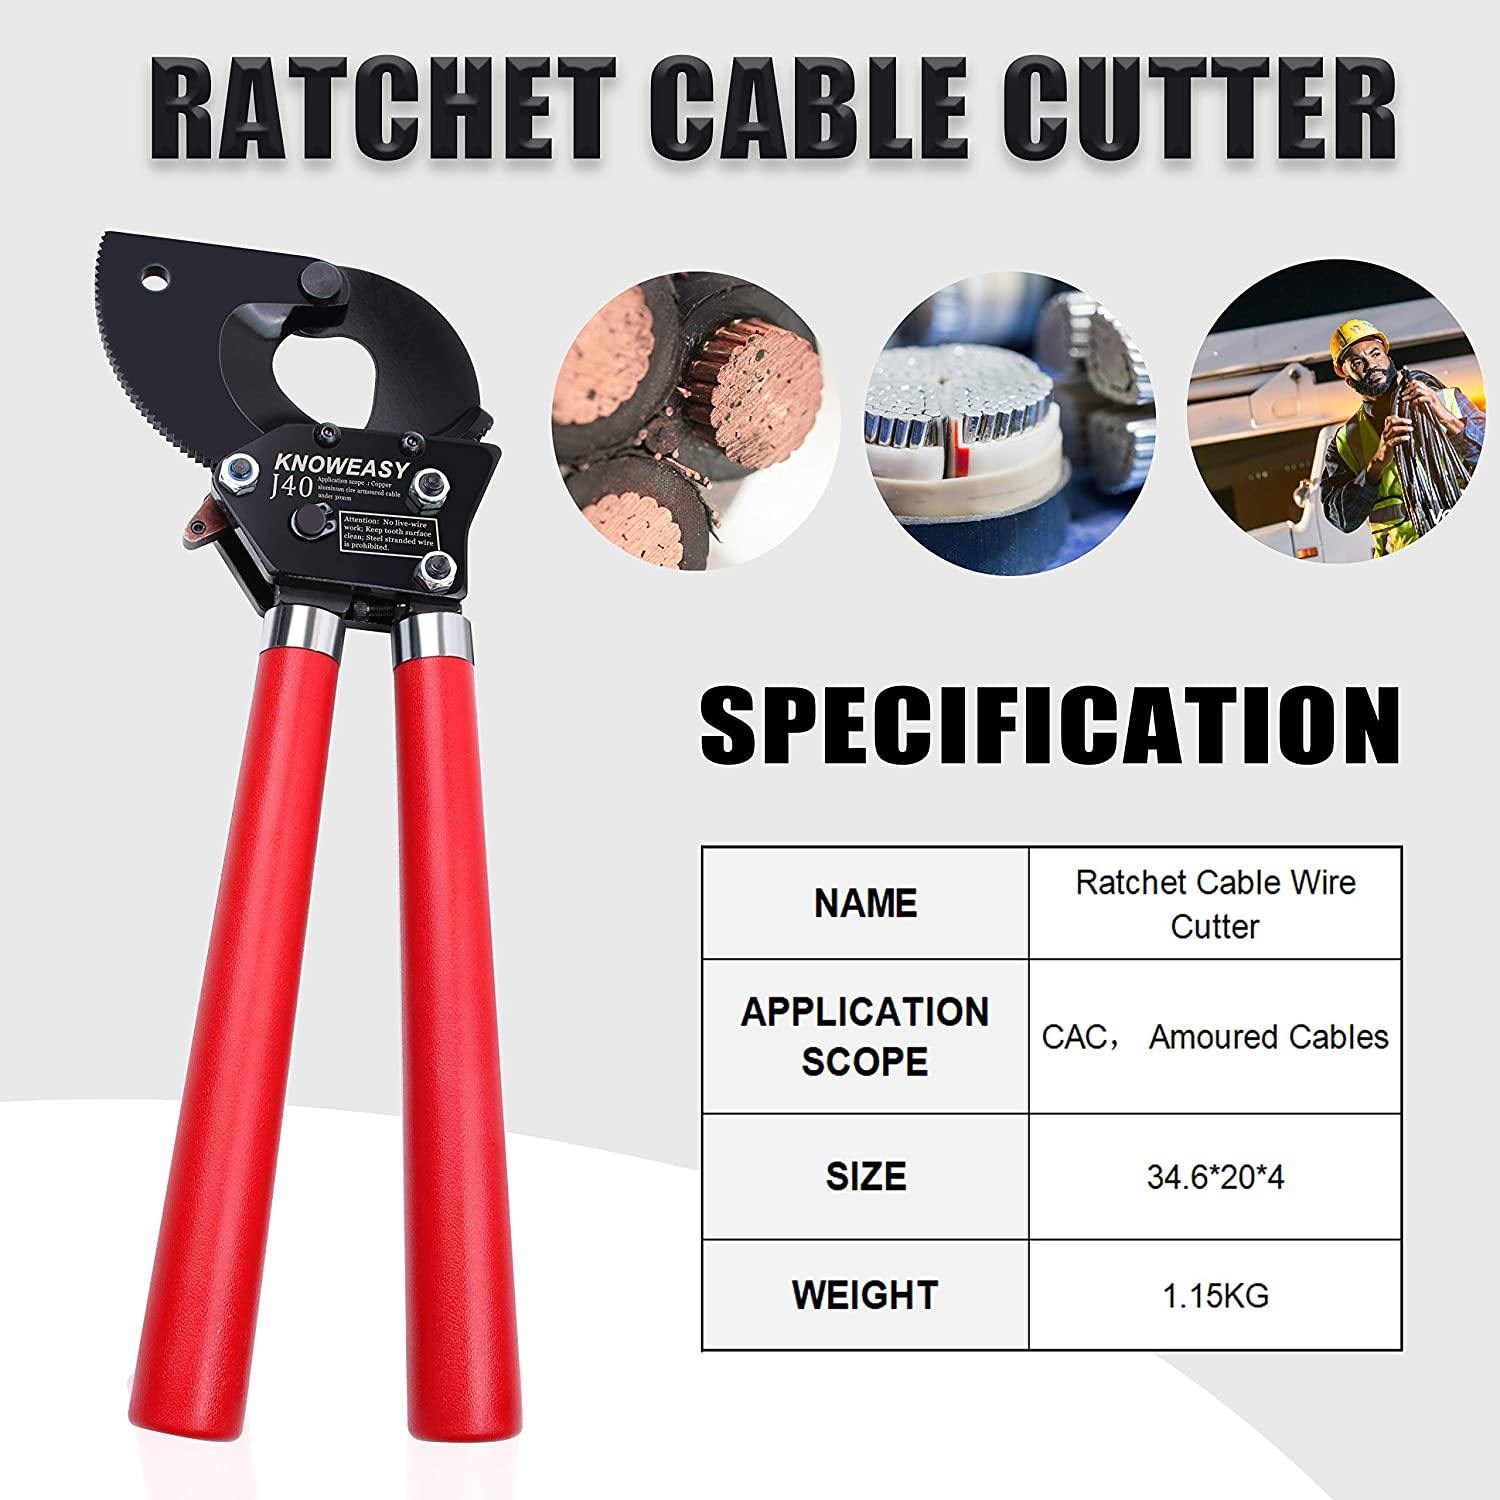 Cable Cutter,Knoweasy Heavy Duty Aluminum Copper Ratchet Cable Cutter,Cut  up to 240mm² Wire Cutter